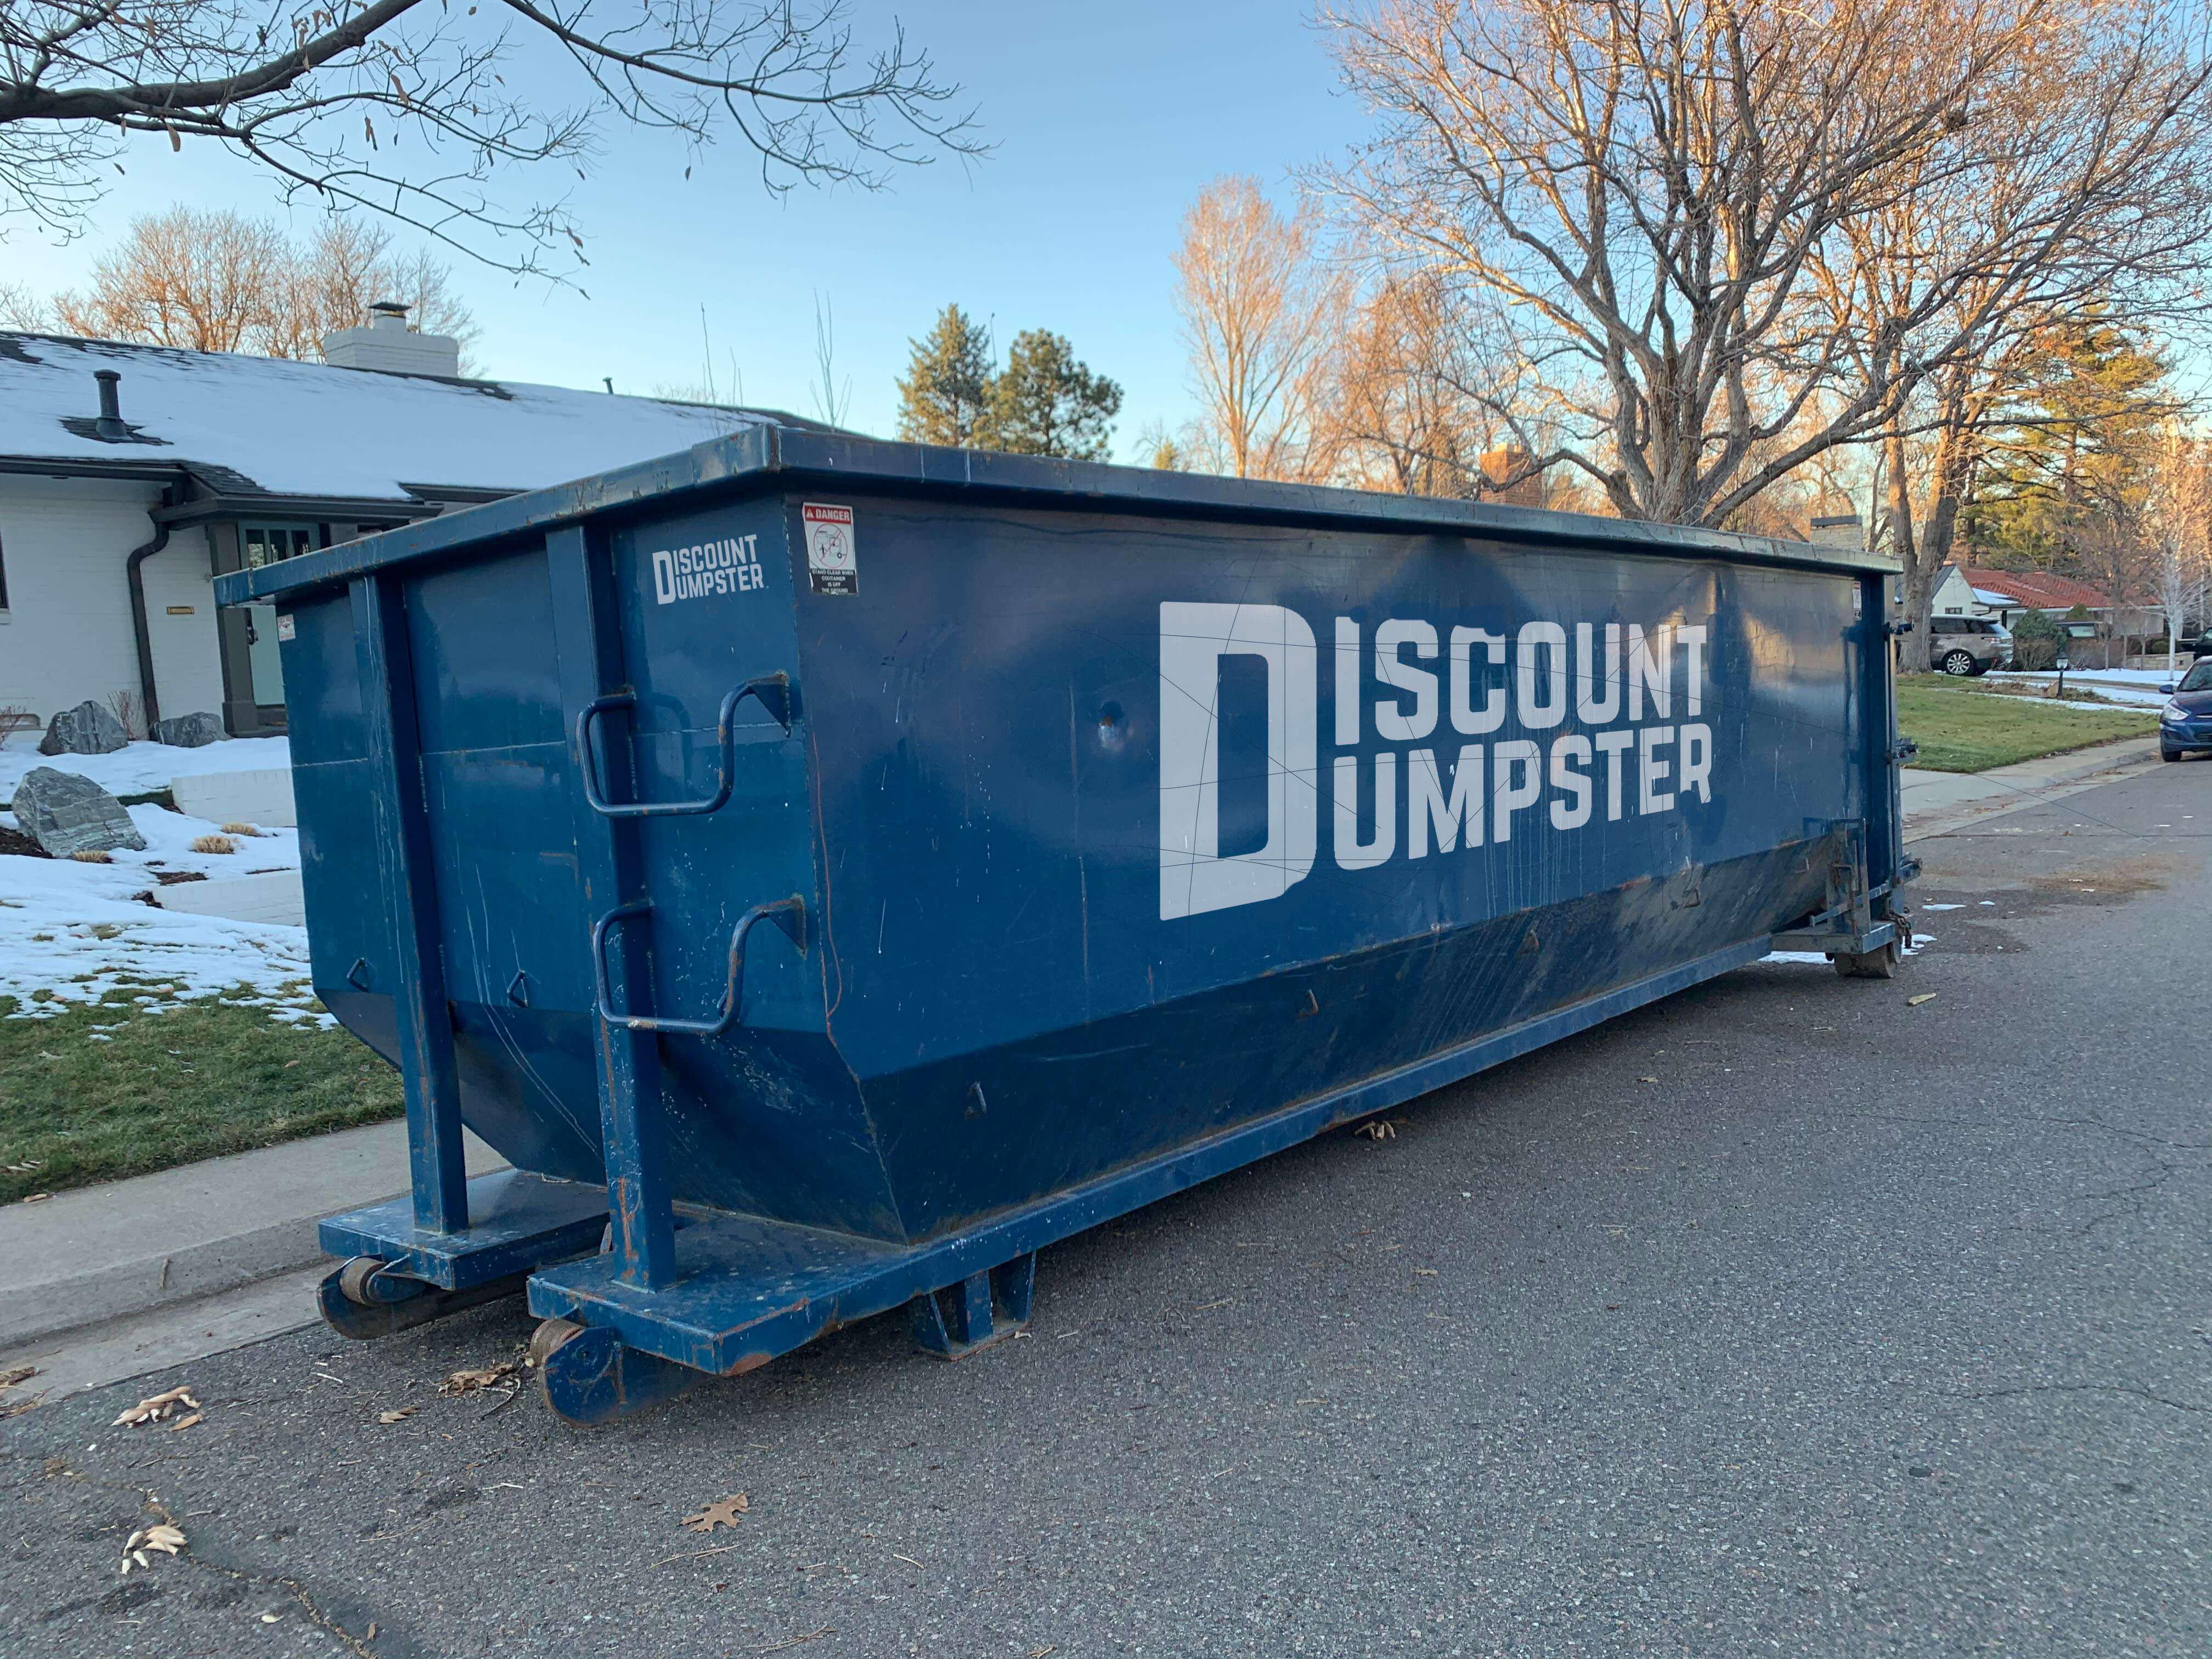 Discount dumpster has affordable dumpster rentals for residential projects in Denver co